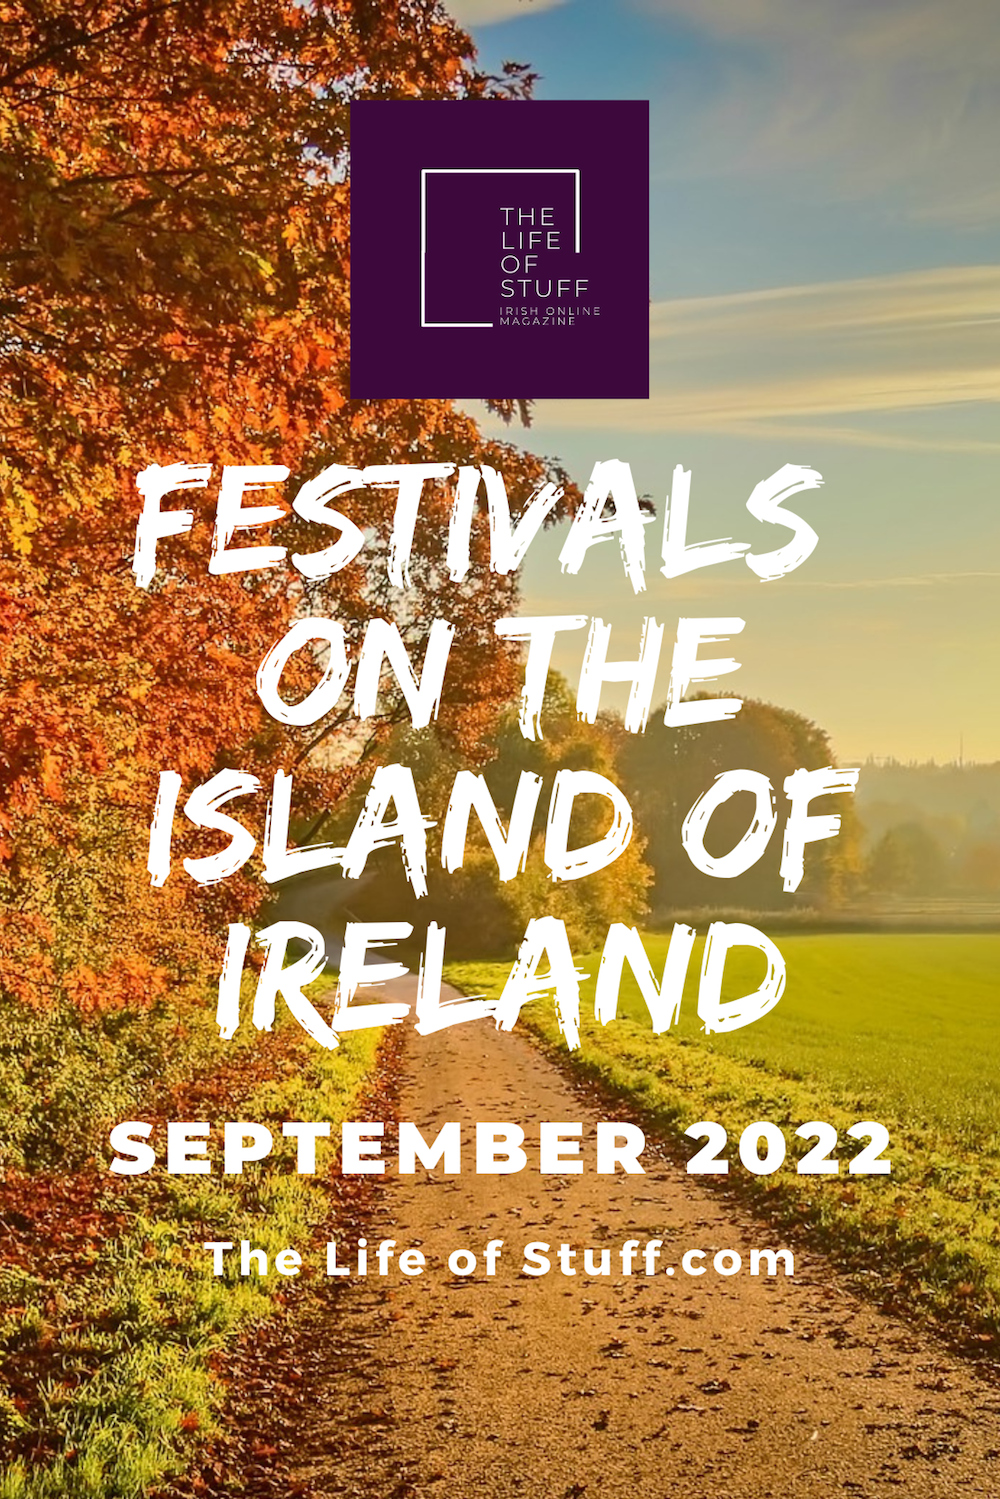 What’s On - Top Festivals this September 2022 in Ireland - The Life of Stuff